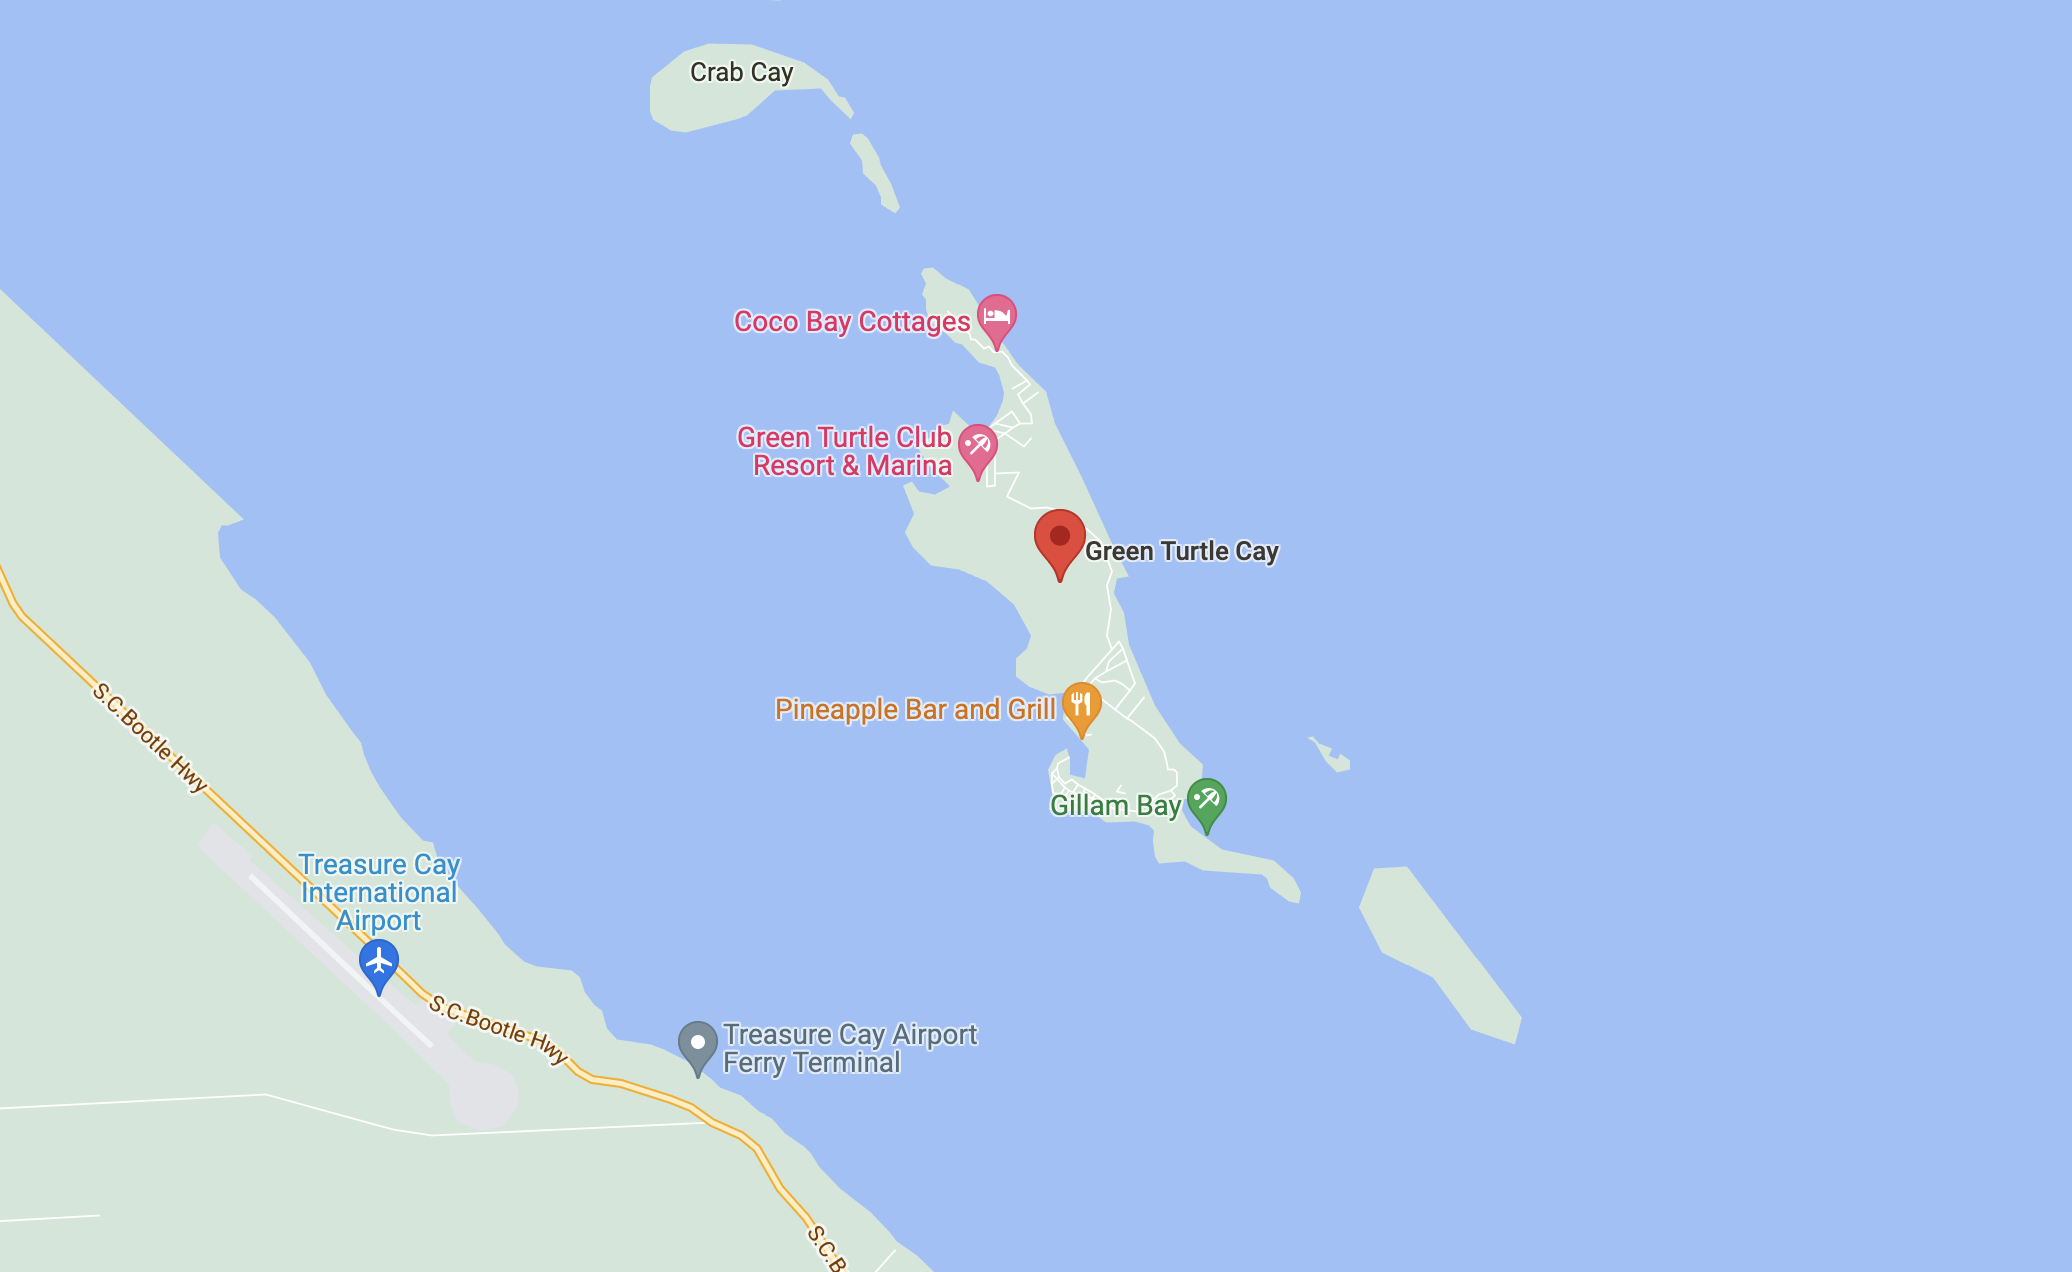 Flights to Green Turtle Cay